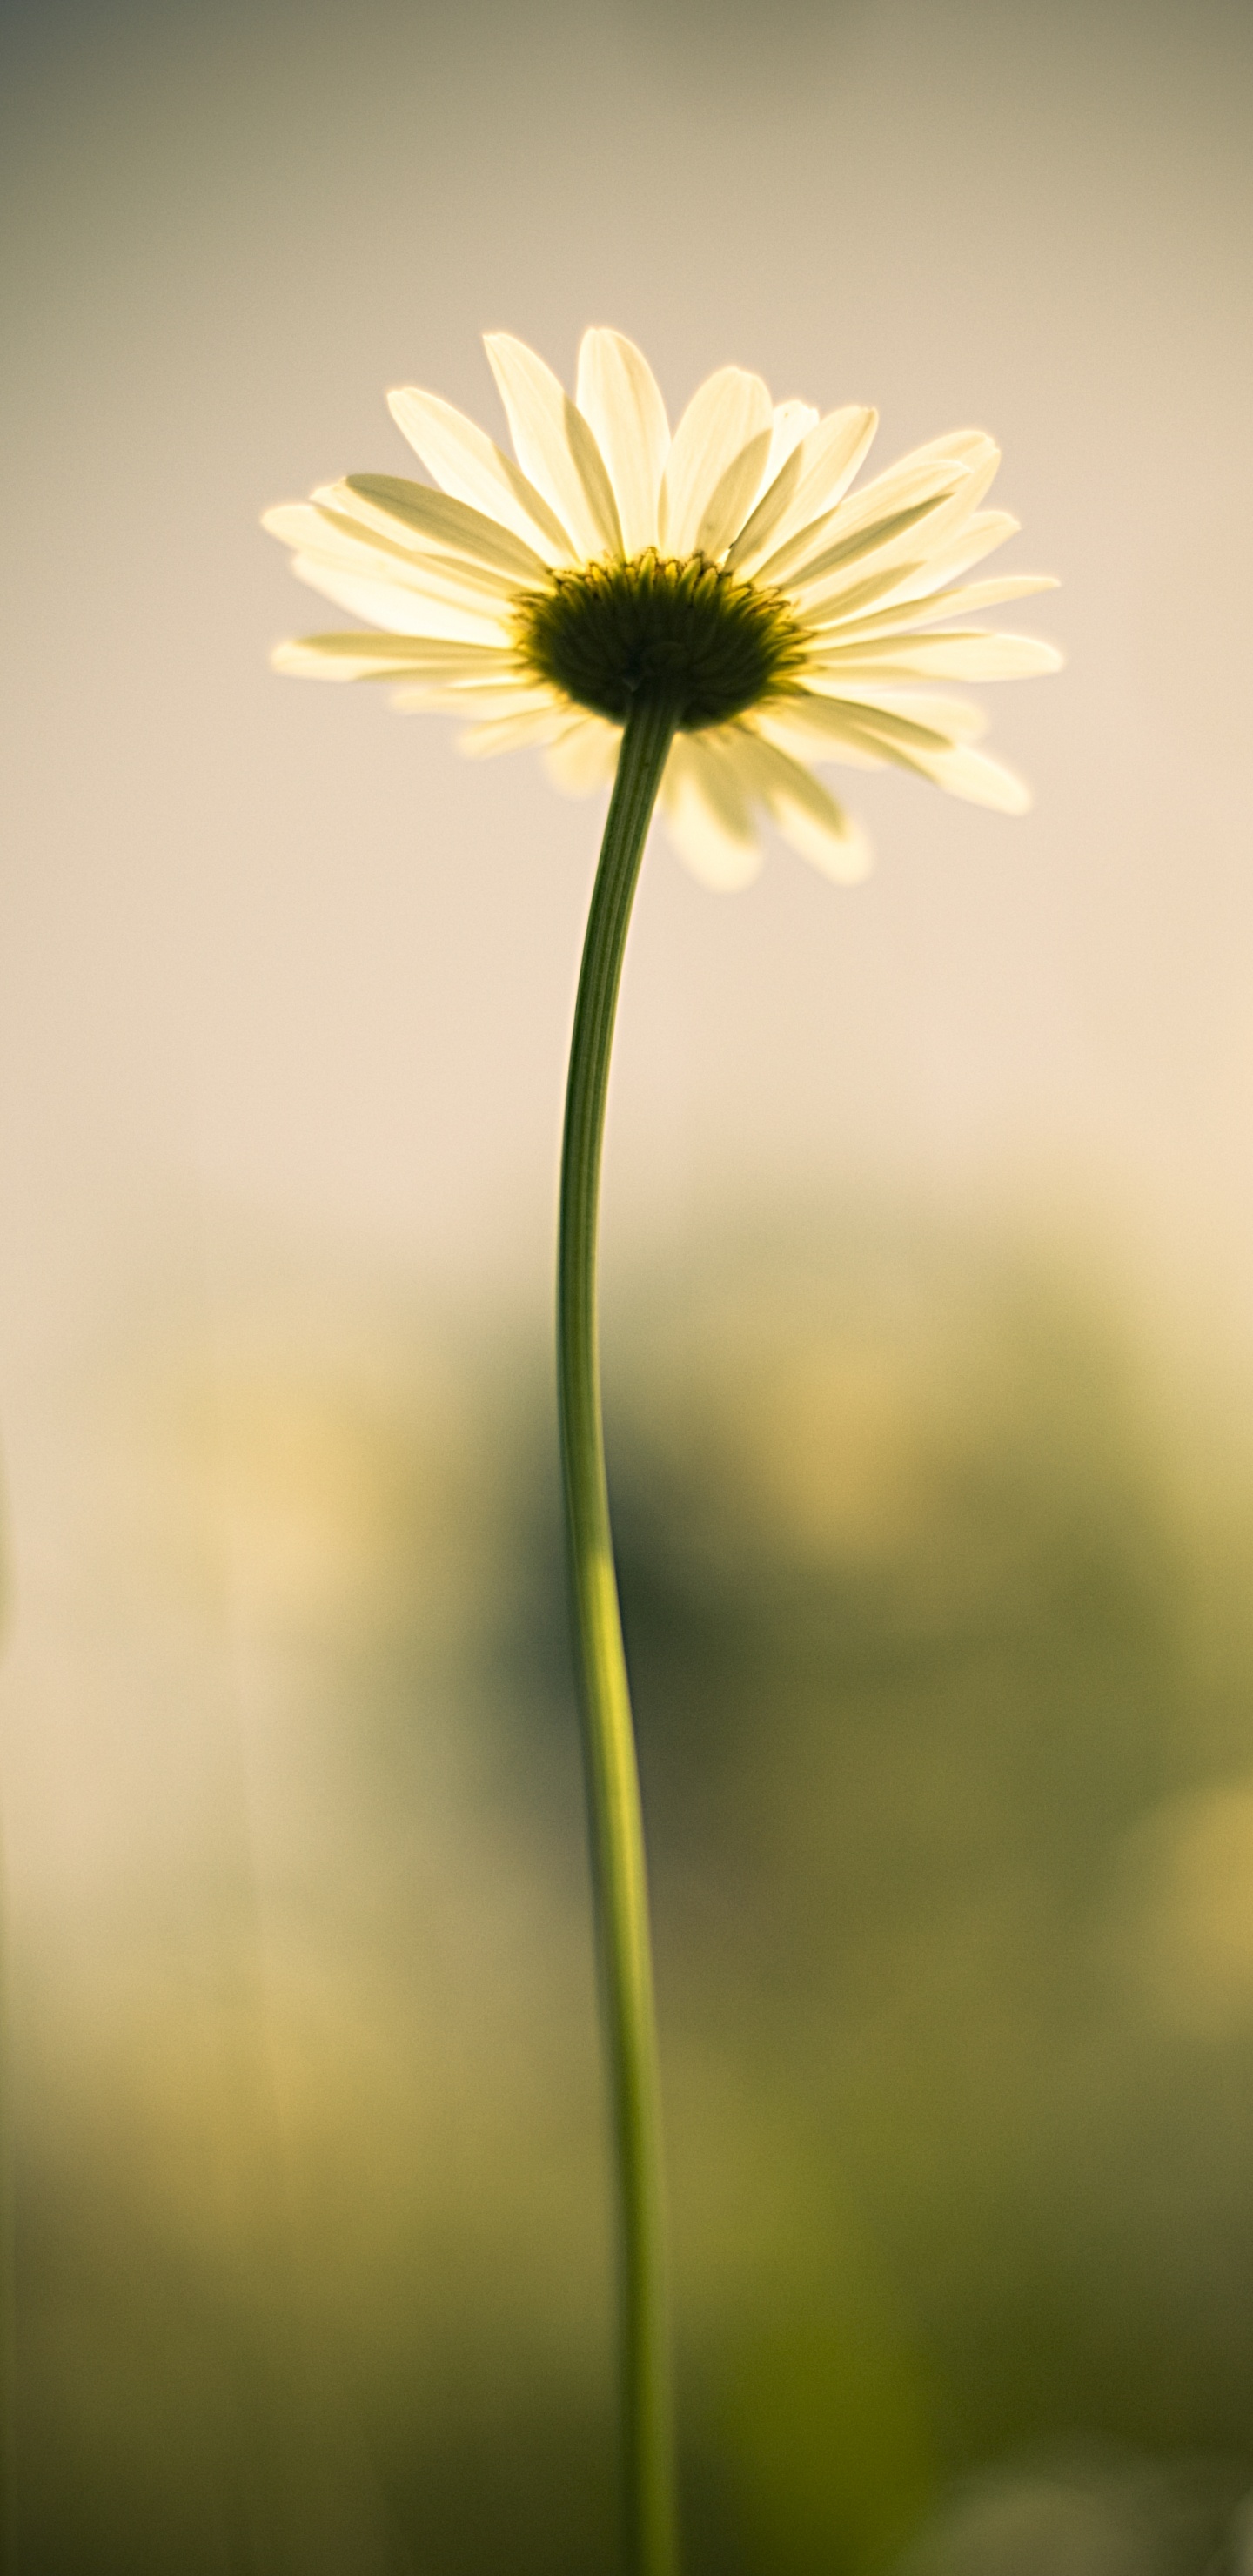 White and Yellow Daisy in Bloom. Wallpaper in 1440x2960 Resolution